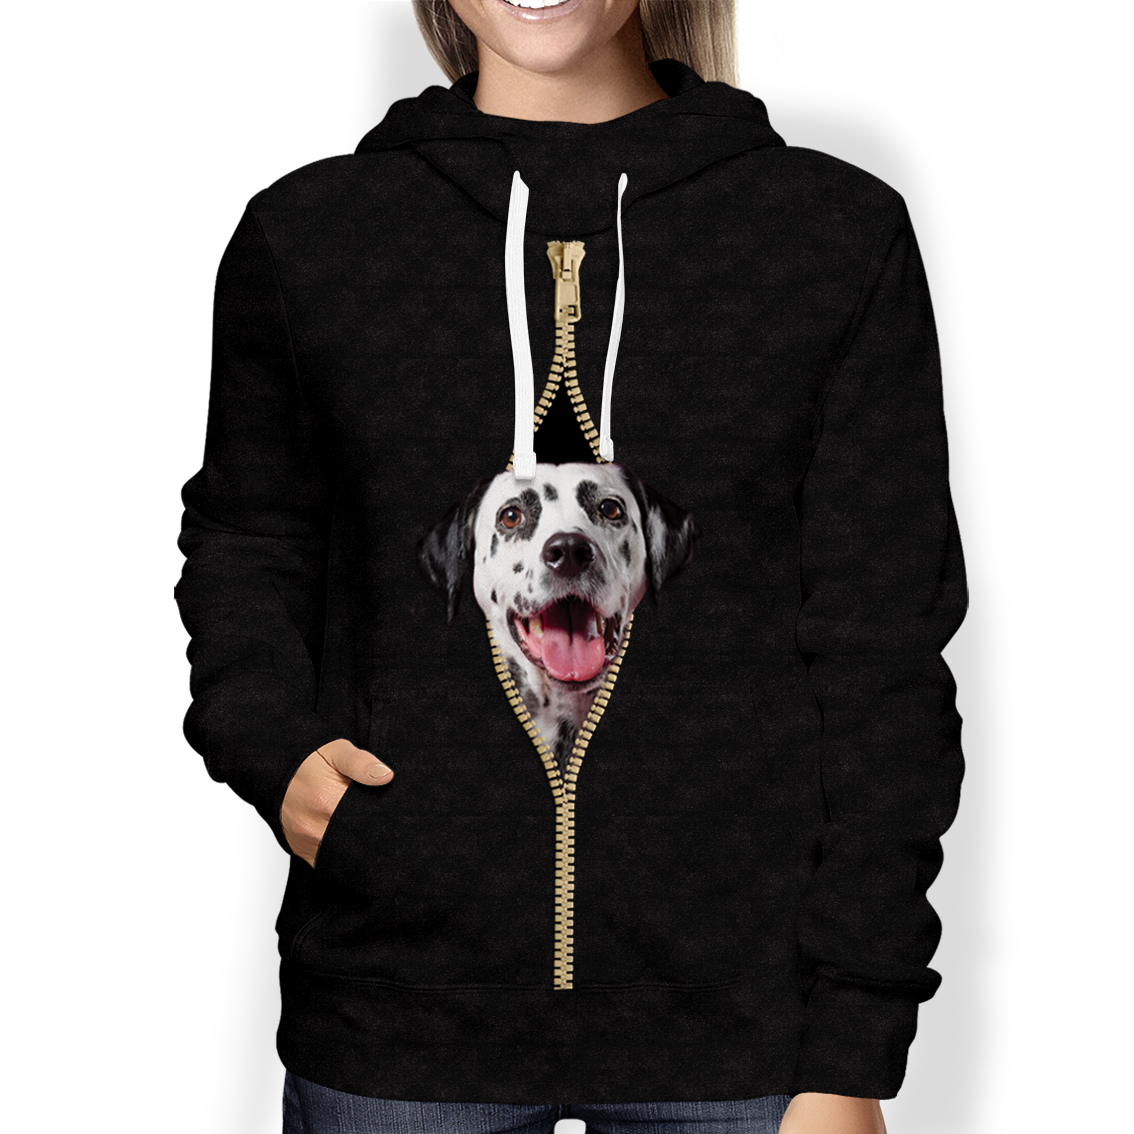 I'm With You - Dalmatian Hoodie V2